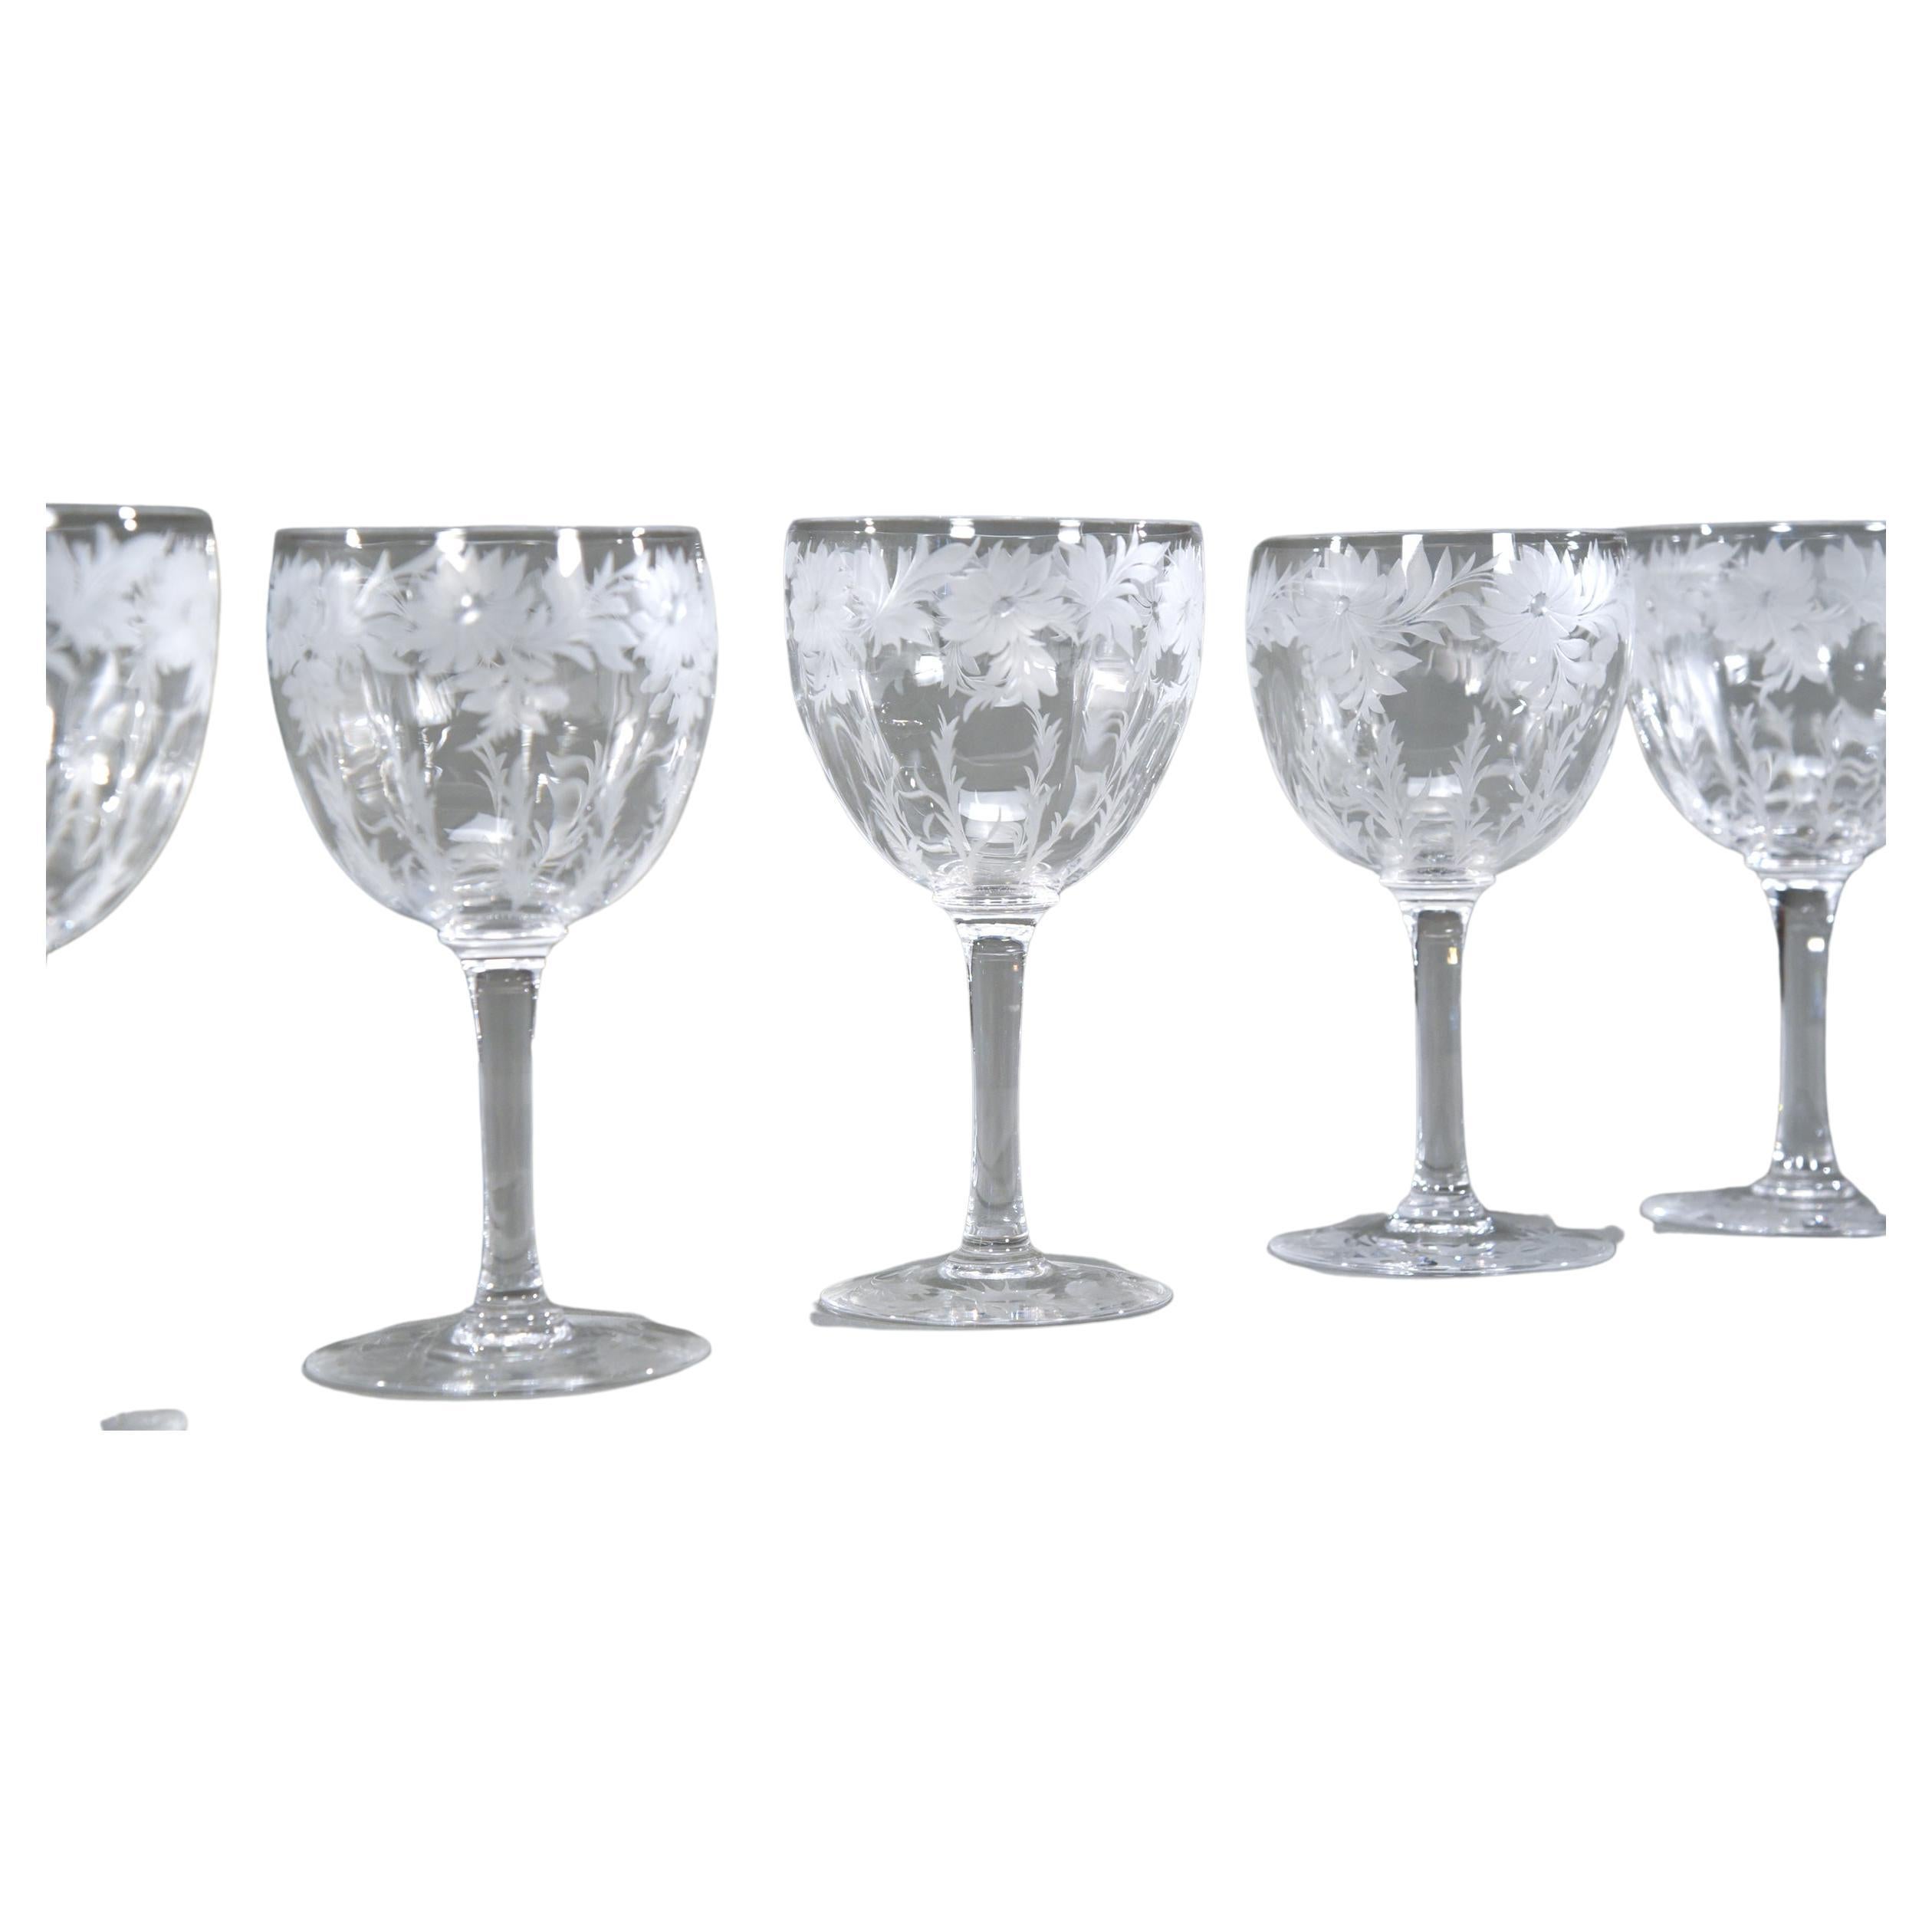 12 Hand Blown Signed Libbey Wheel Cut Crystal Goblets Arts & Crafts Floral Motif For Sale